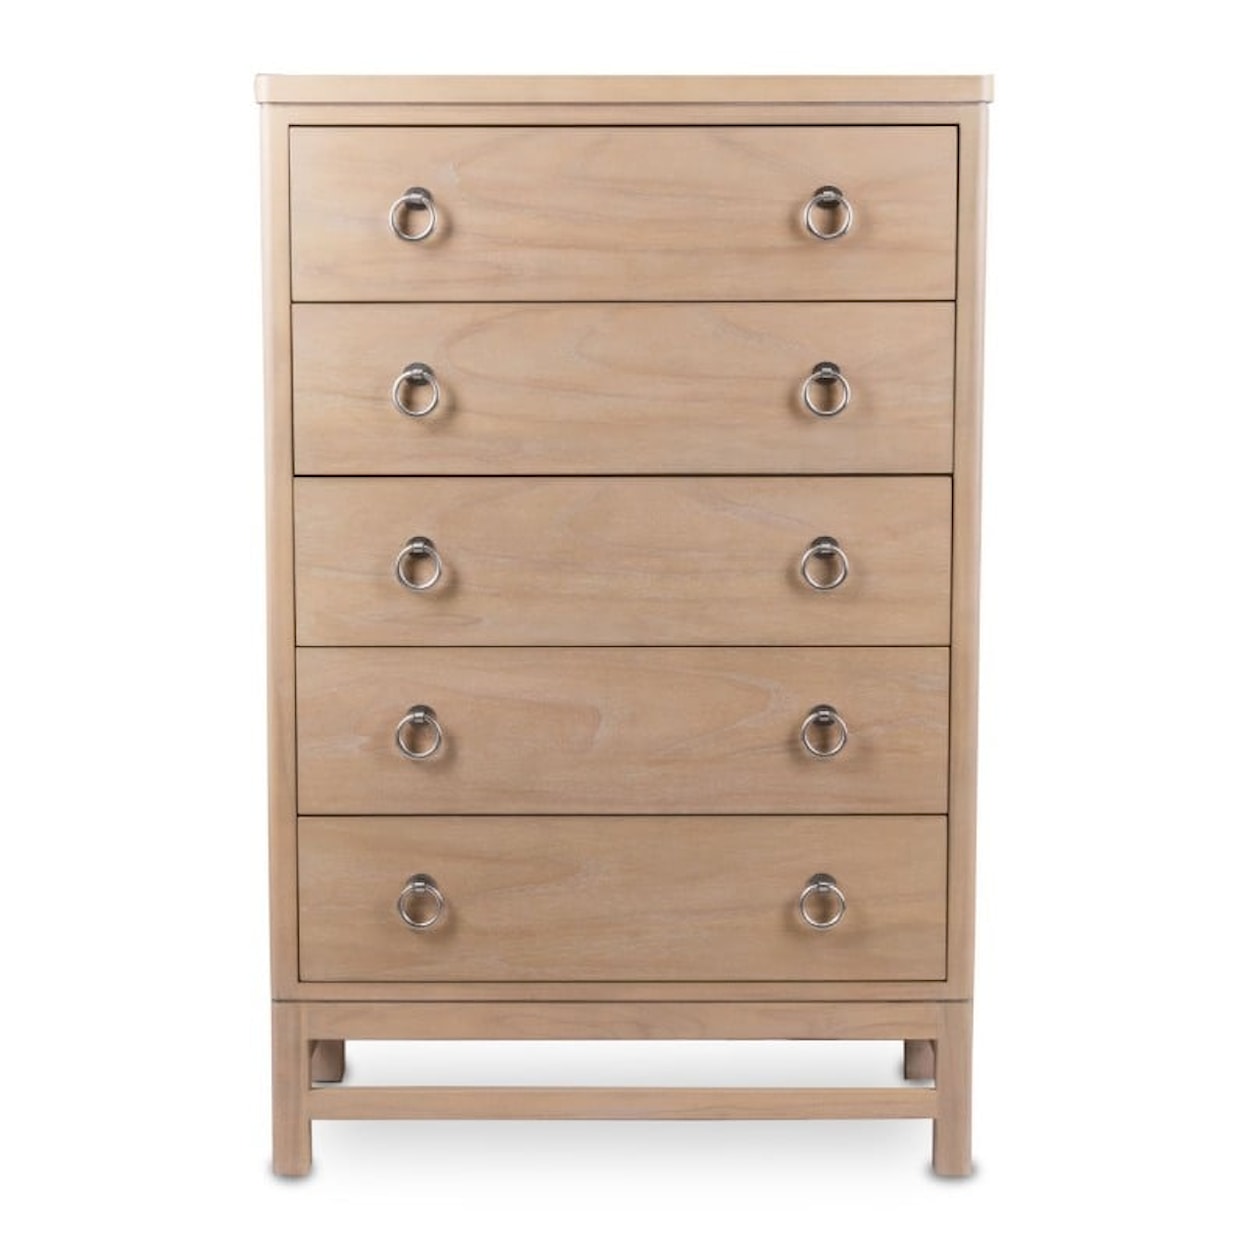 Sea Winds Trading Company Monterey Bedroom Drawer Chest